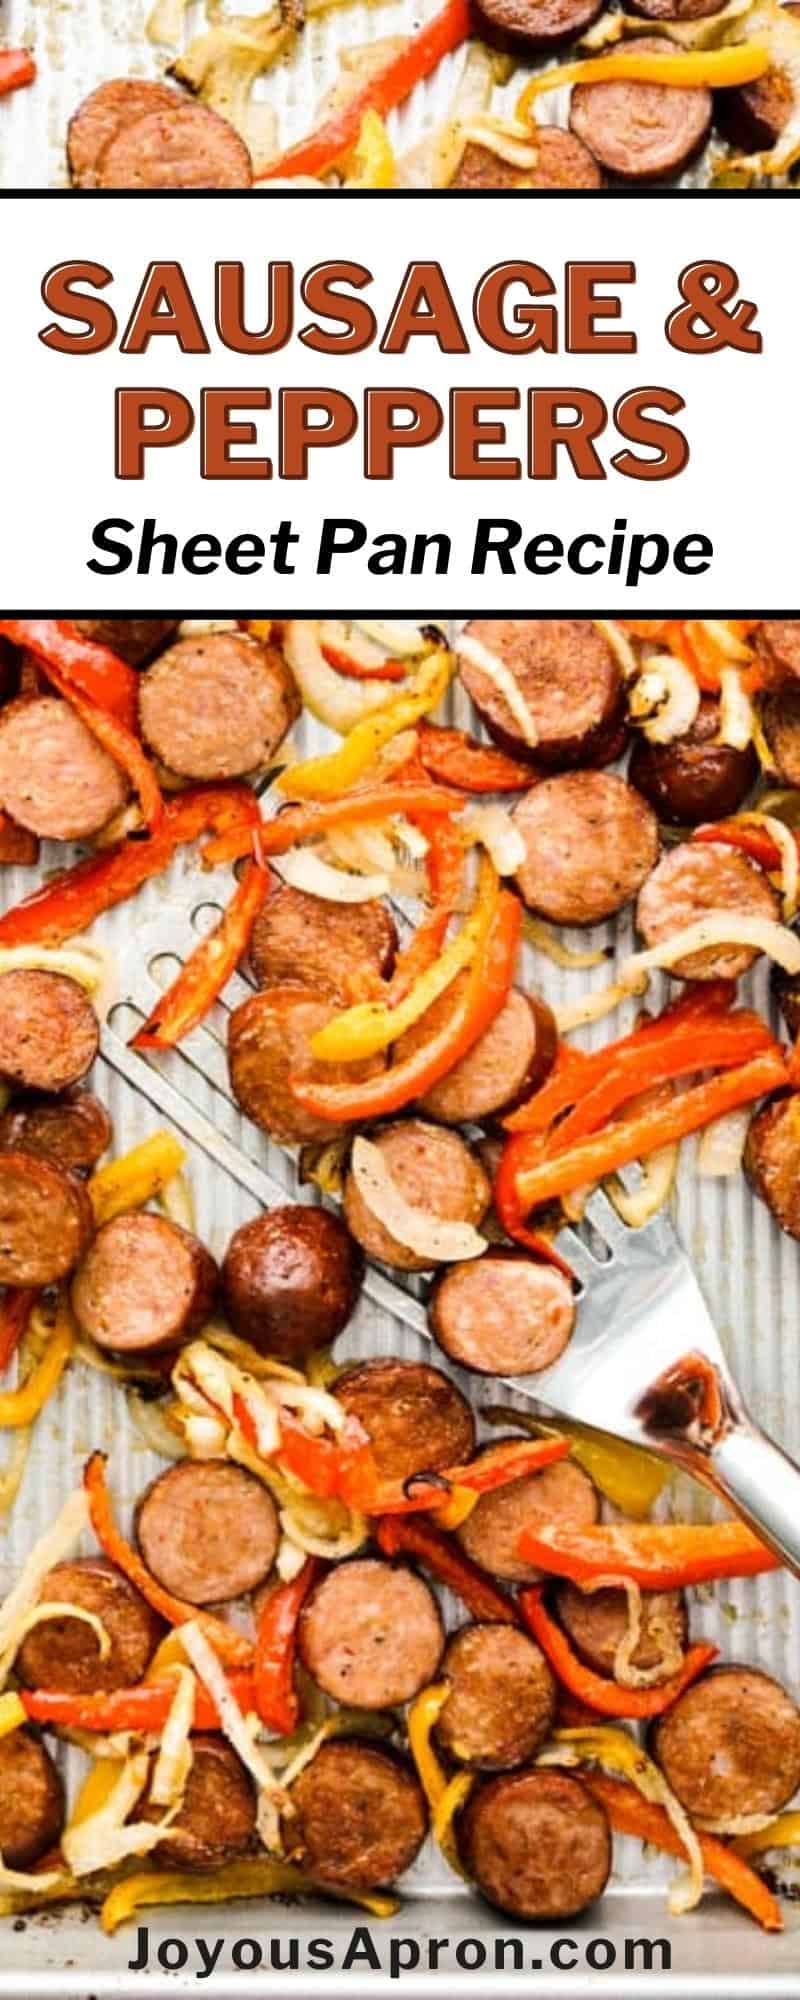 Sheet Pan Oven Baked Sausage and Peppers - Easy weeknight dinner ready under 30 minutes! Low carb, quick and yummy! Sausage, peppers and onions baked in the oven on just one pan. Easy cleanup! via @joyousapron